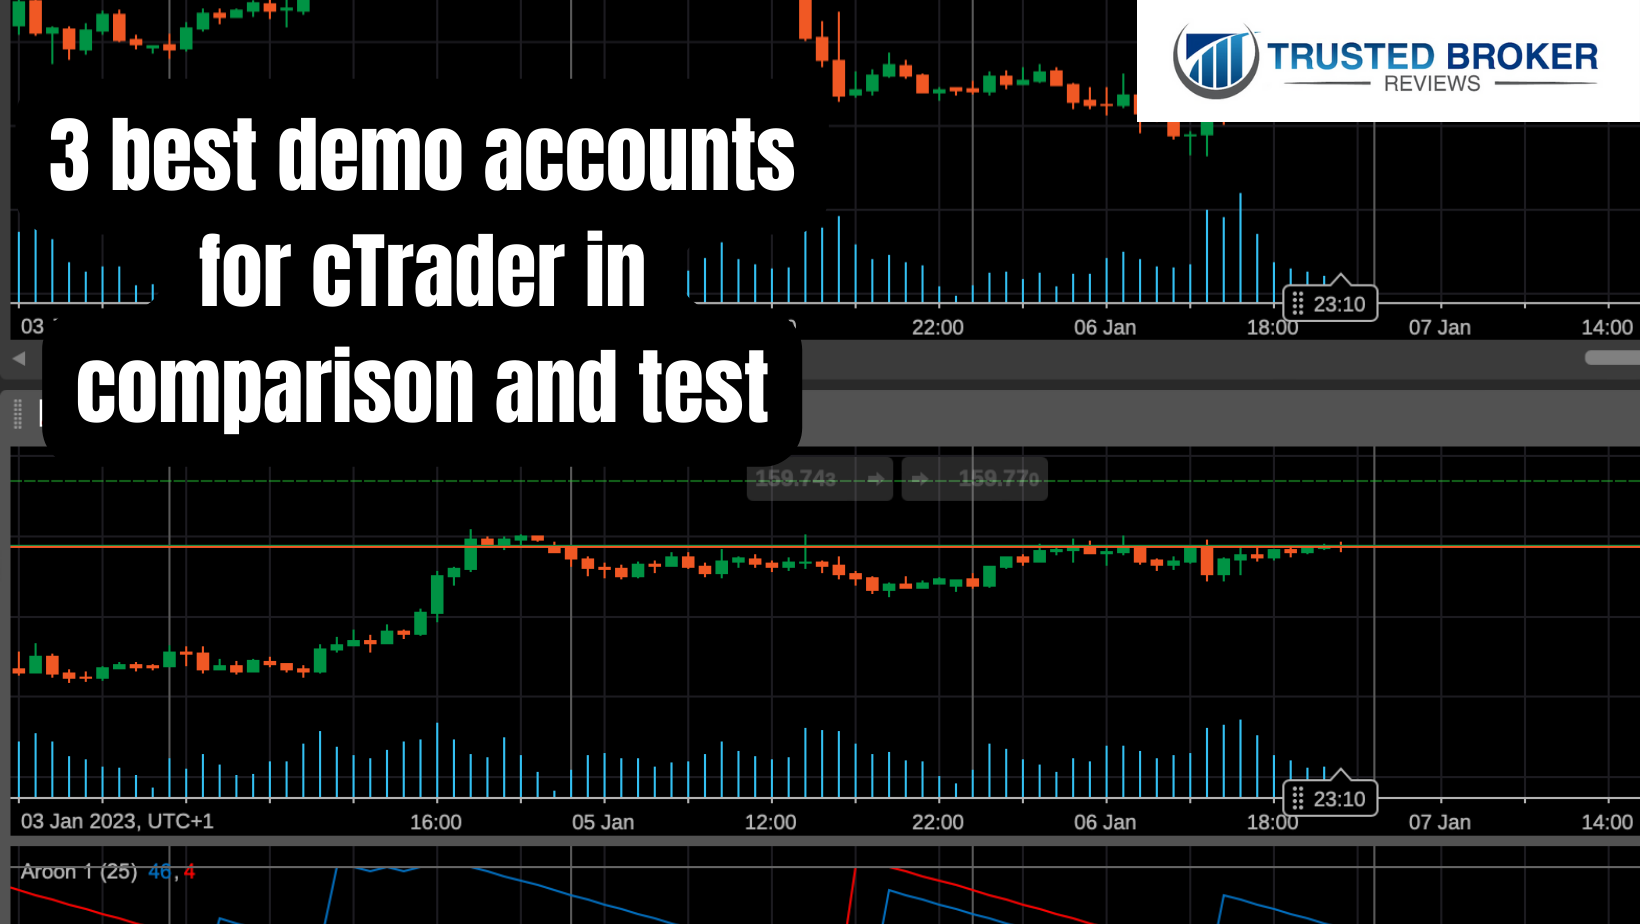 3 best demo accounts for cTrader in comparison and test